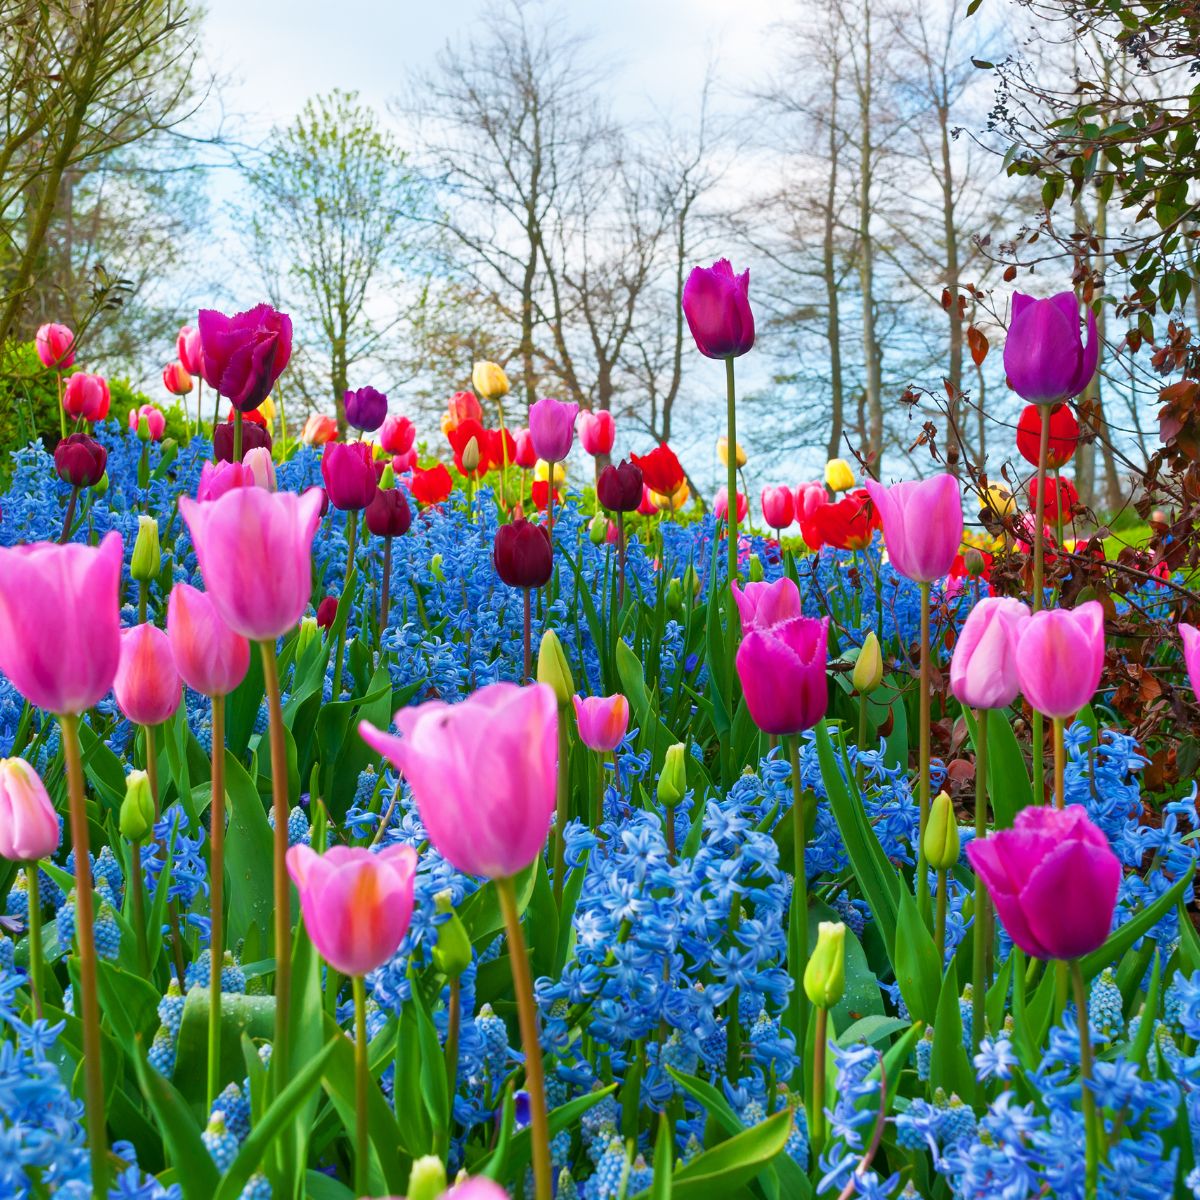 tulips in pink shades, blue hyacinths, and muscari. 